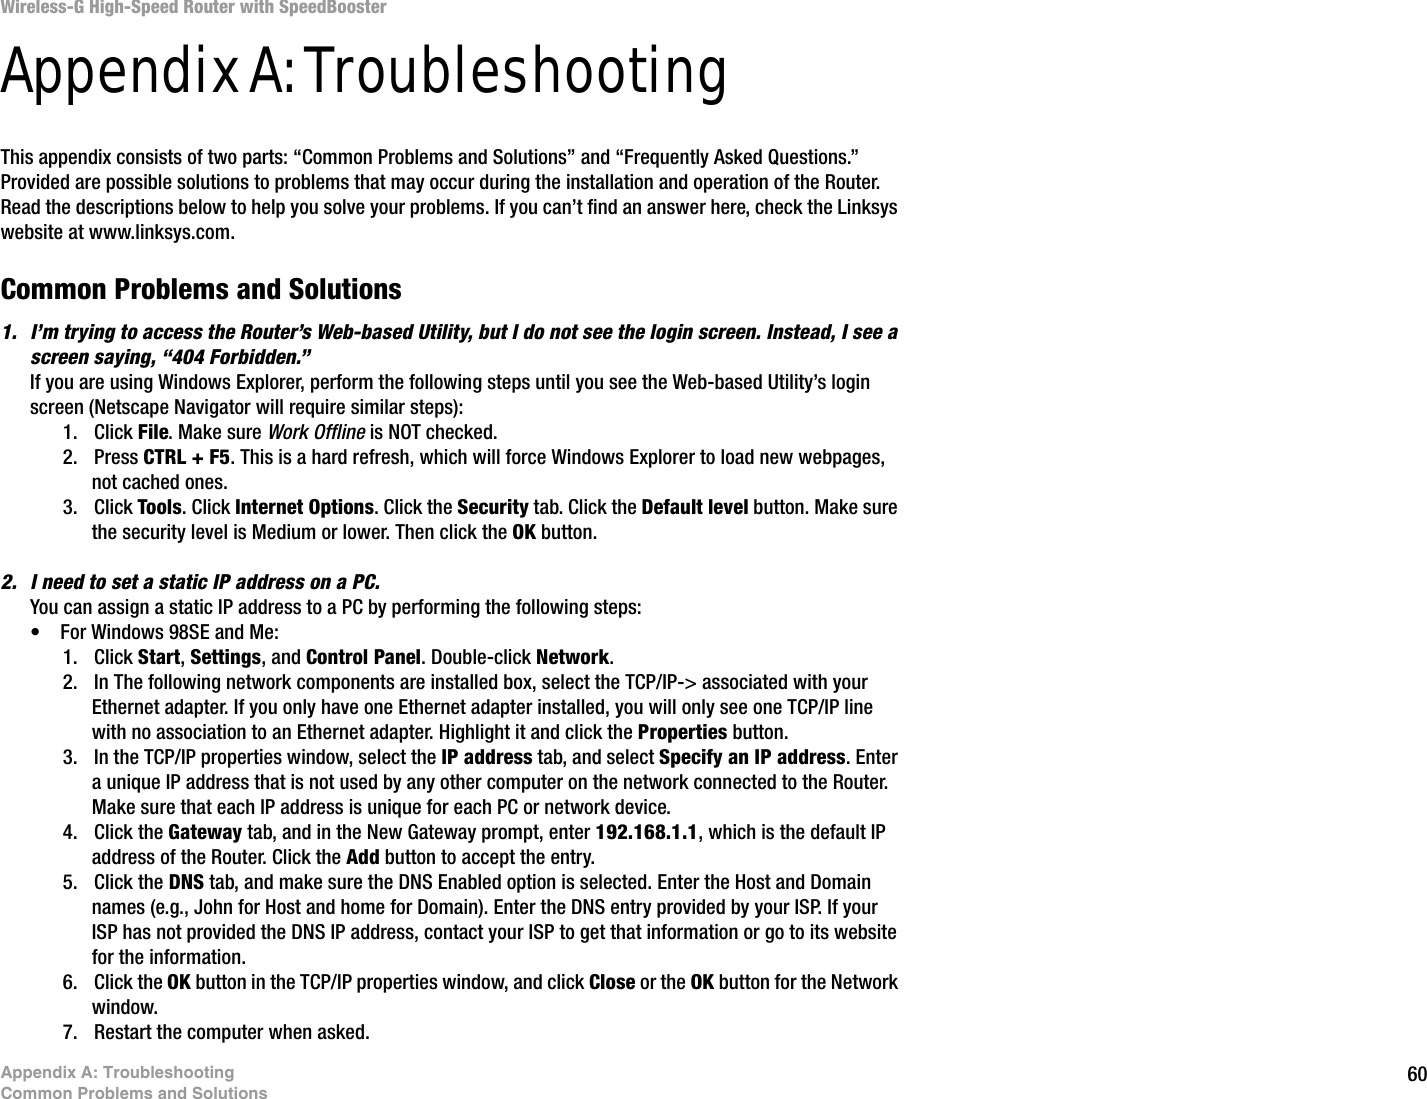 60Appendix A: TroubleshootingCommon Problems and SolutionsWireless-G High-Speed Router with SpeedBoosterAppendix A: TroubleshootingThis appendix consists of two parts: “Common Problems and Solutions” and “Frequently Asked Questions.” Provided are possible solutions to problems that may occur during the installation and operation of the Router. Read the descriptions below to help you solve your problems. If you can’t find an answer here, check the Linksys website at www.linksys.com.Common Problems and Solutions1. I’m trying to access the Router’s Web-based Utility, but I do not see the login screen. Instead, I see a screen saying, “404 Forbidden.”If you are using Windows Explorer, perform the following steps until you see the Web-based Utility’s login screen (Netscape Navigator will require similar steps):1. Click File. Make sure Work Offline is NOT checked.2. Press CTRL + F5. This is a hard refresh, which will force Windows Explorer to load new webpages, not cached ones.3. Click Tools. Click Internet Options. Click the Security tab. Click the Default level button. Make sure the security level is Medium or lower. Then click the OK button.2. I need to set a static IP address on a PC.You can assign a static IP address to a PC by performing the following steps:• For Windows 98SE and Me:1. Click Start, Settings, and Control Panel. Double-click Network.2. In The following network components are installed box, select the TCP/IP-&gt; associated with your Ethernet adapter. If you only have one Ethernet adapter installed, you will only see one TCP/IP line with no association to an Ethernet adapter. Highlight it and click the Properties button.3. In the TCP/IP properties window, select the IP address tab, and select Specify an IP address. Enter a unique IP address that is not used by any other computer on the network connected to the Router. Make sure that each IP address is unique for each PC or network device.4. Click the Gateway tab, and in the New Gateway prompt, enter 192.168.1.1, which is the default IP address of the Router. Click the Add button to accept the entry.5. Click the DNS tab, and make sure the DNS Enabled option is selected. Enter the Host and Domain names (e.g., John for Host and home for Domain). Enter the DNS entry provided by your ISP. If your ISP has not provided the DNS IP address, contact your ISP to get that information or go to its website for the information.6. Click the OK button in the TCP/IP properties window, and click Close or the OK button for the Network window.7. Restart the computer when asked.